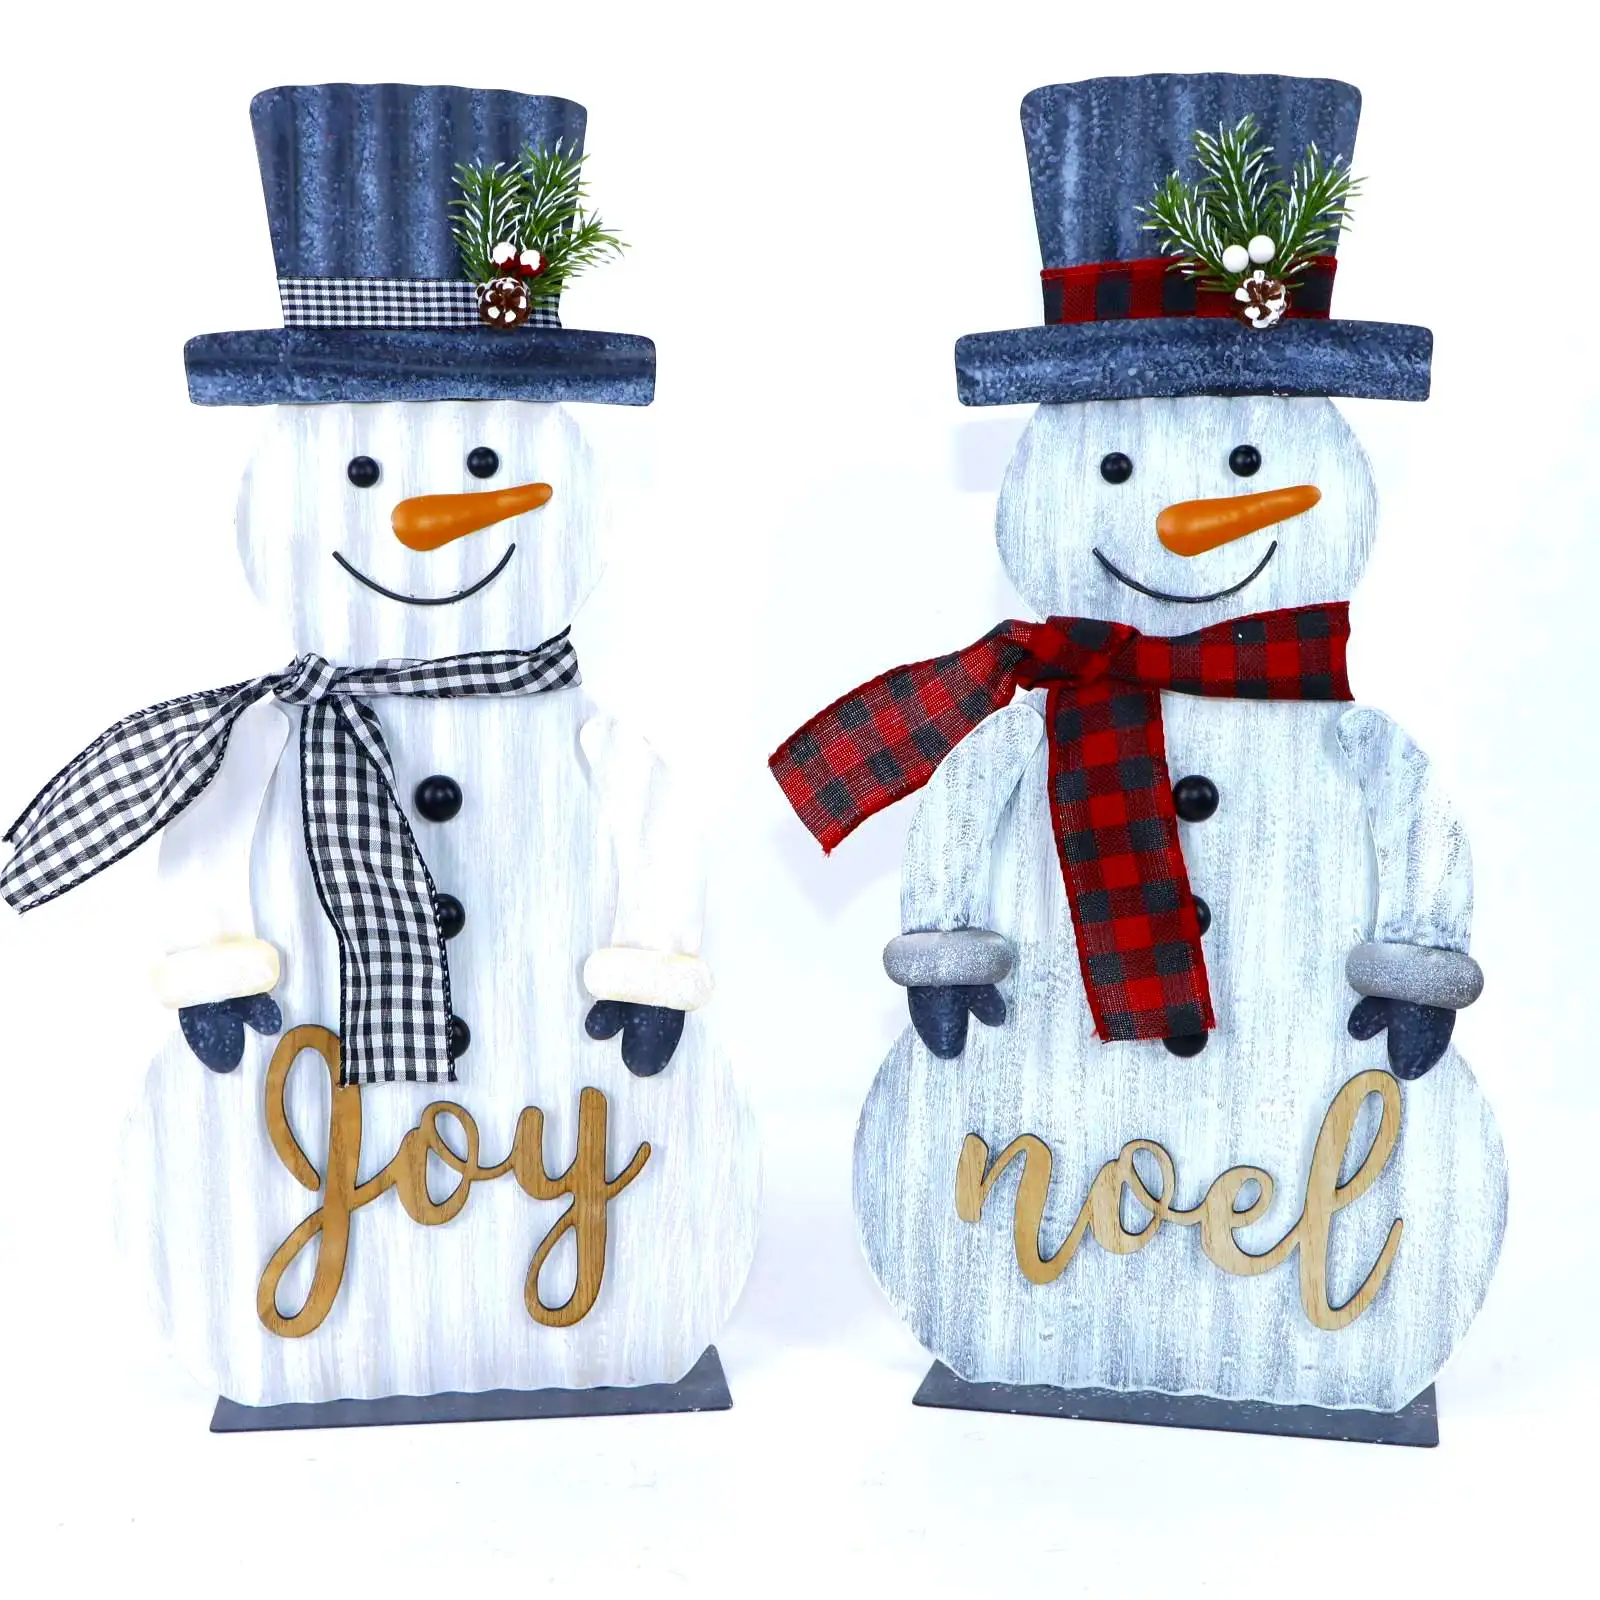 Hot Sale Metal Christmas Decorations Snowman Table Decoration Merry Xmas Table Decoration Merry Christmas Party Decor For Home